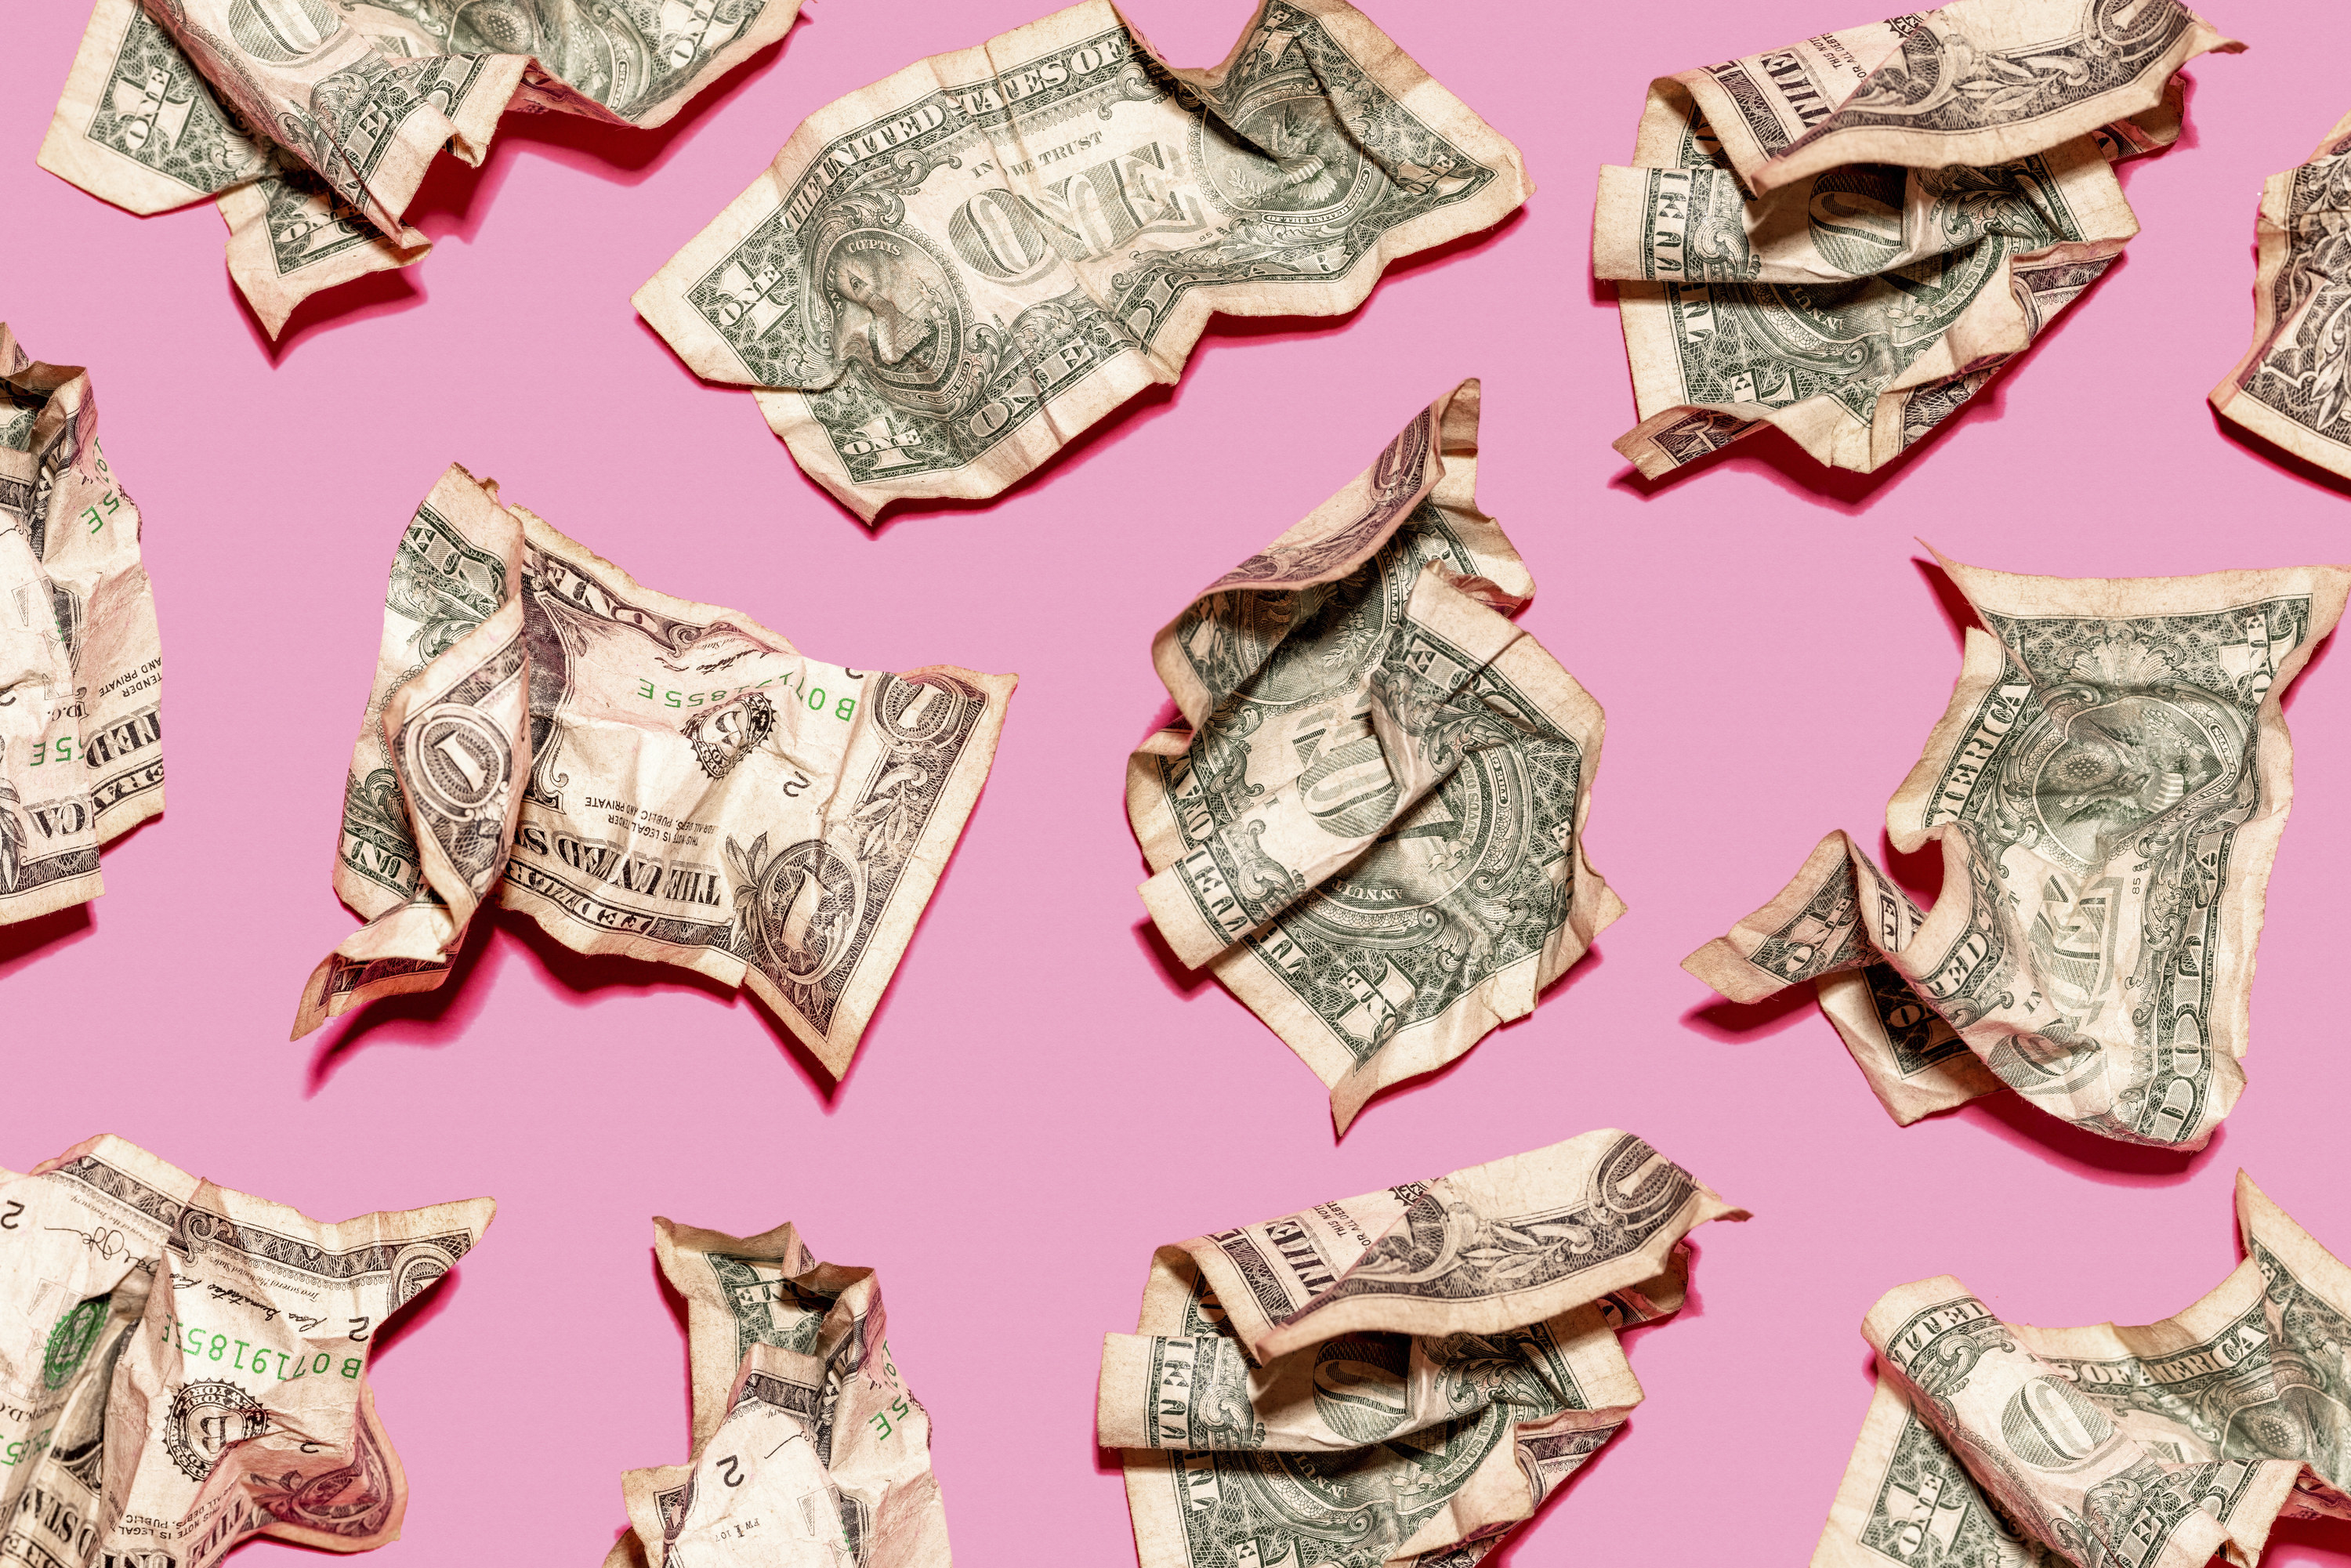 Crumbled up money against a pink backdrop